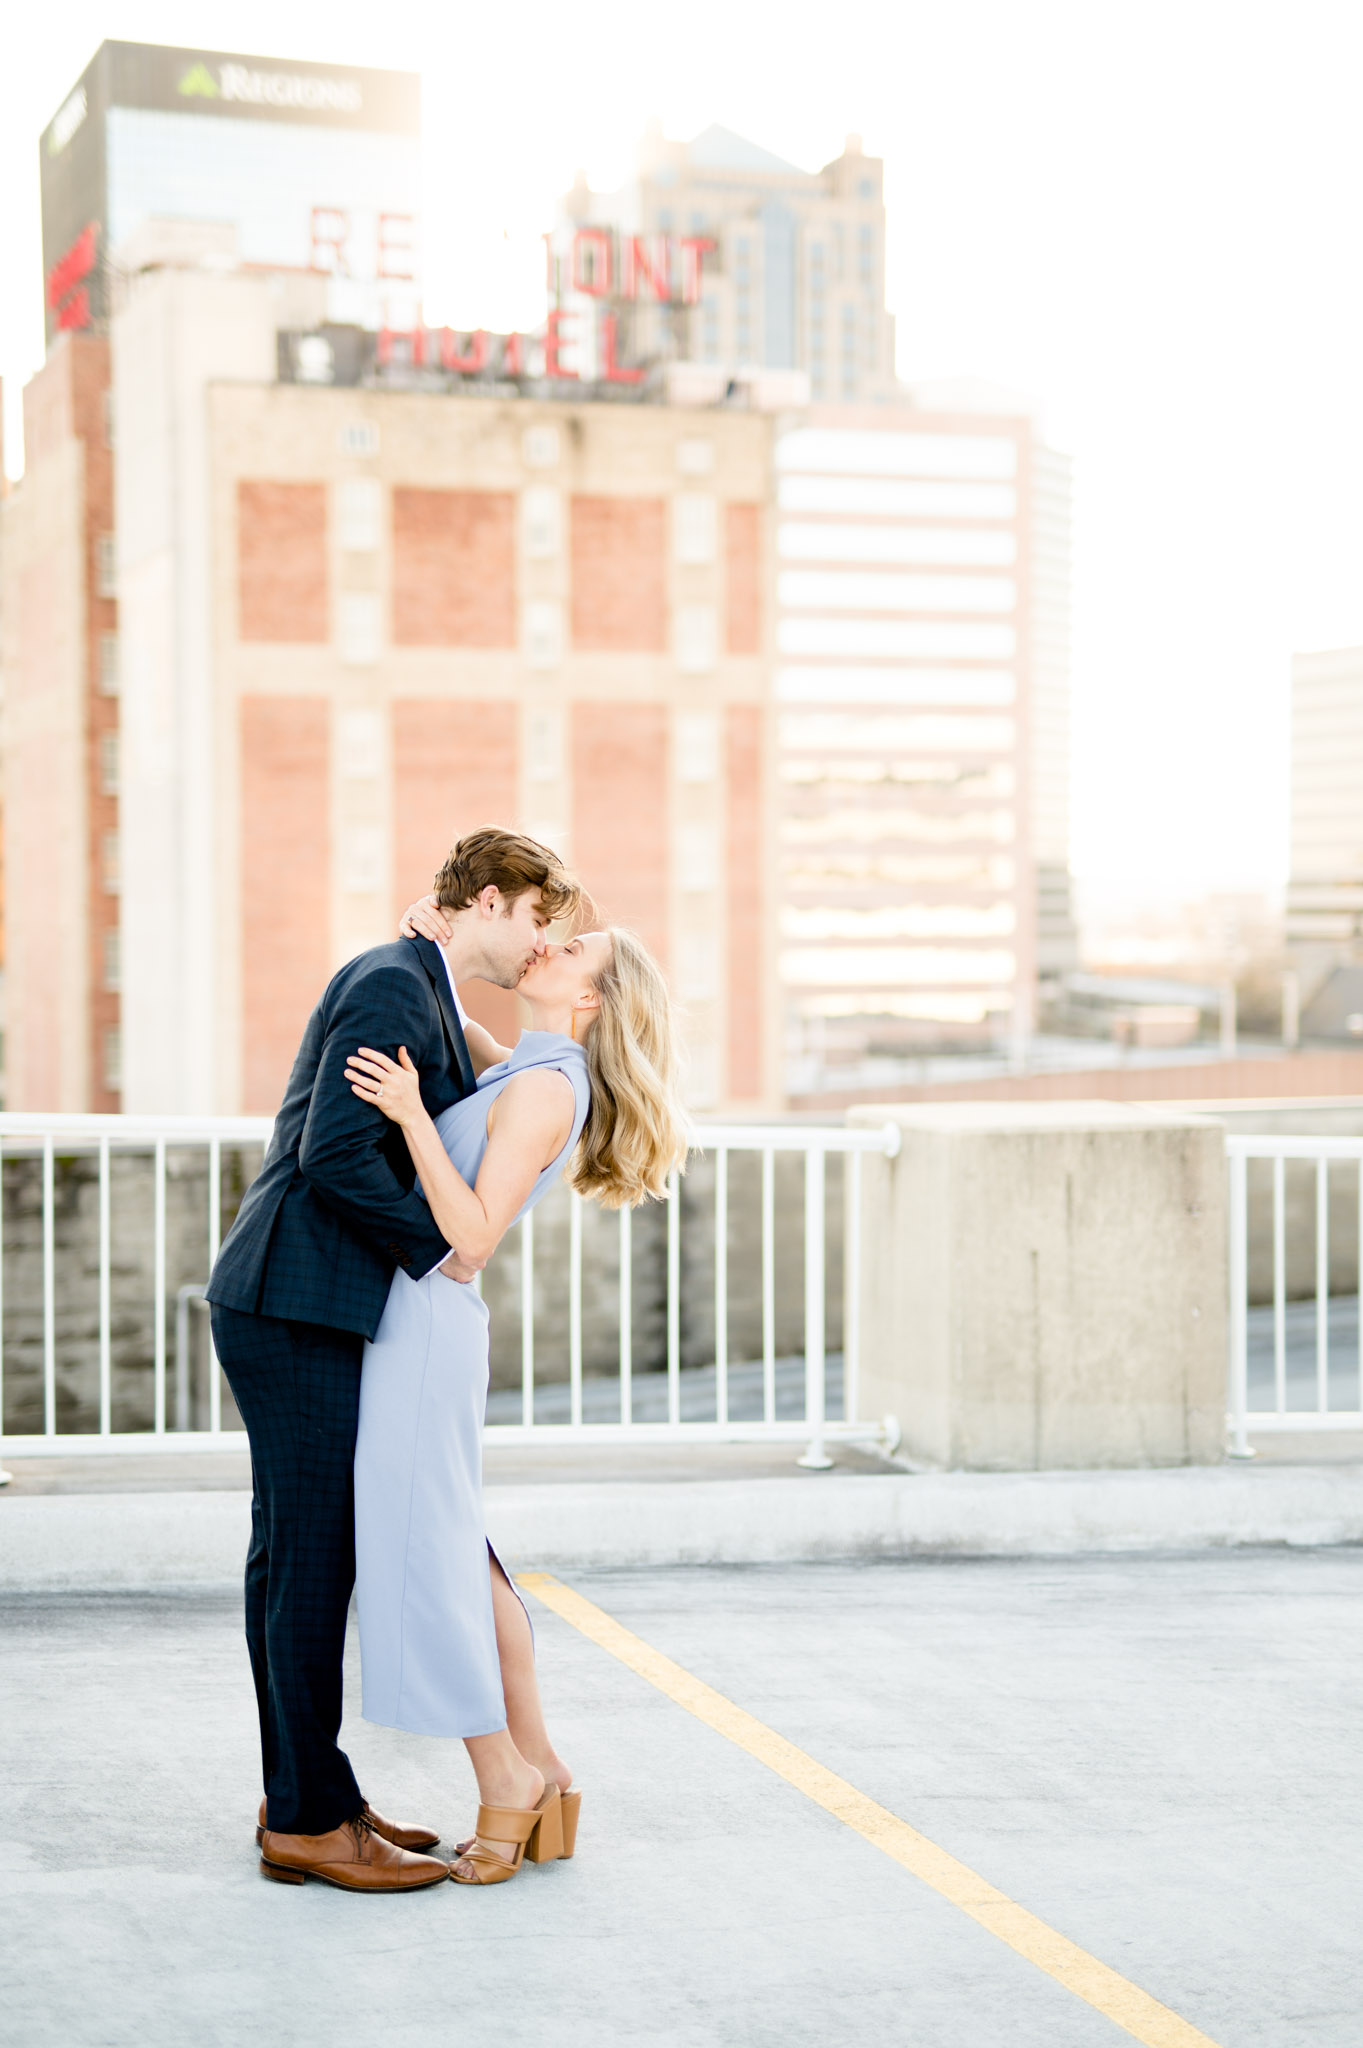 Couple kiss on rooftop of building.